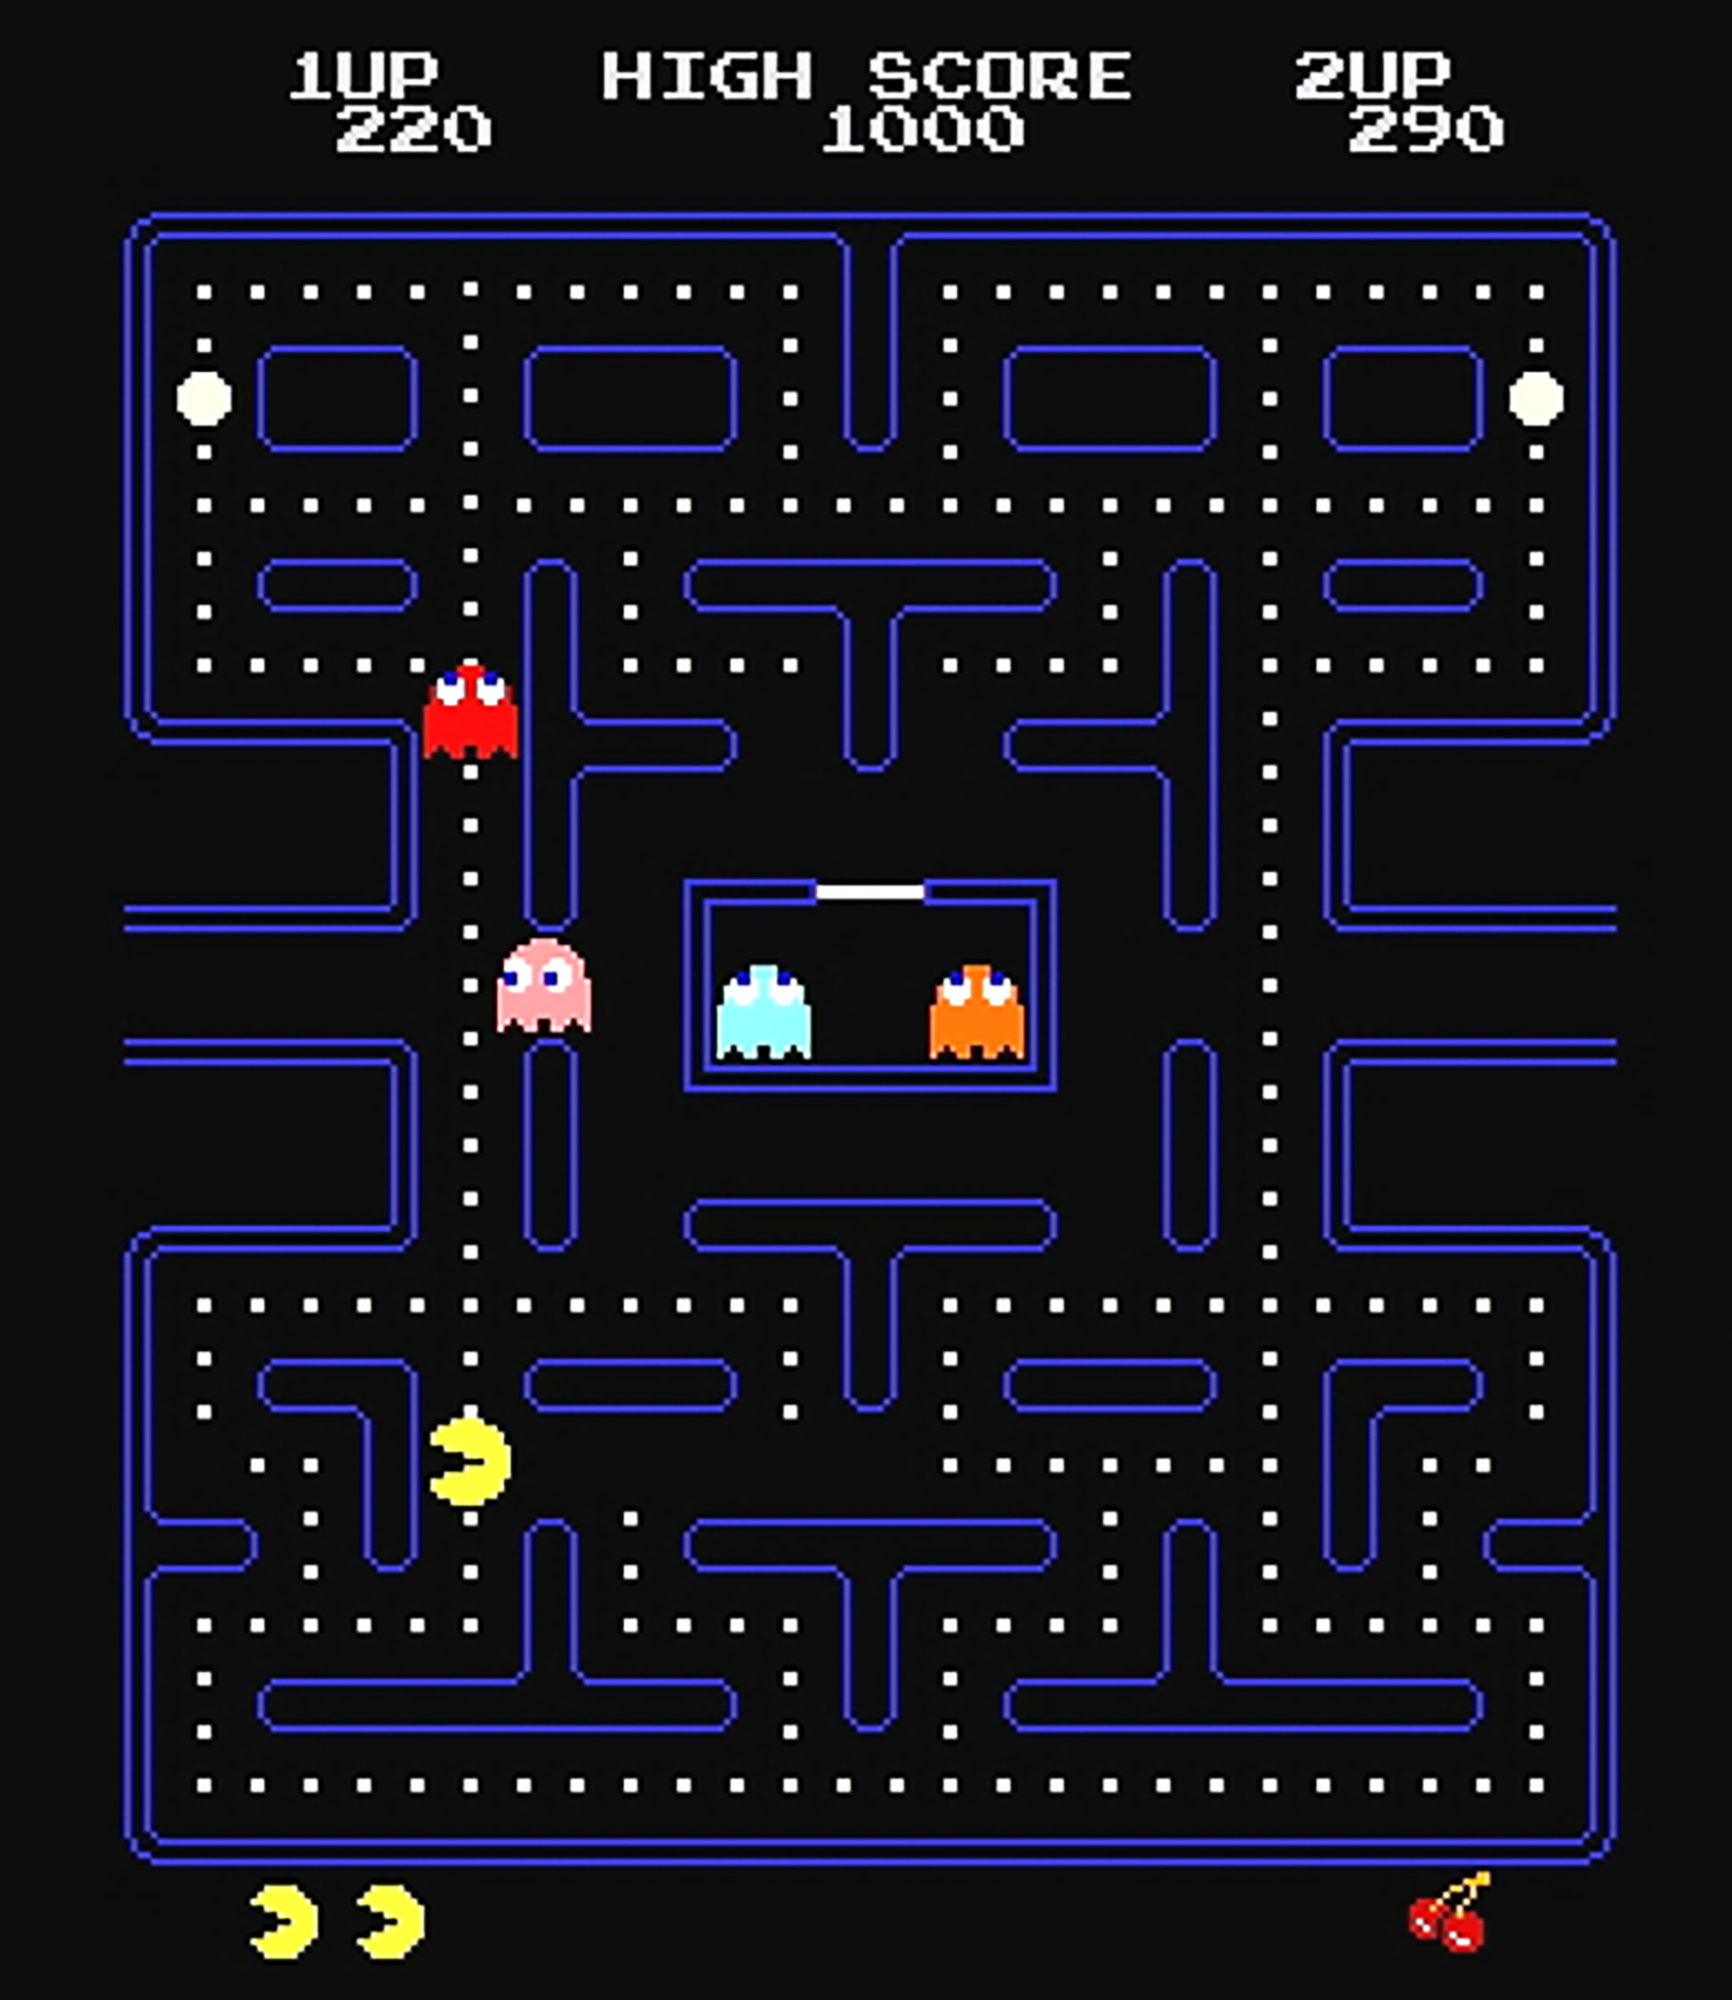 A screen of a game where a yellow circle eats dots in a maze populated by colorful ghosts